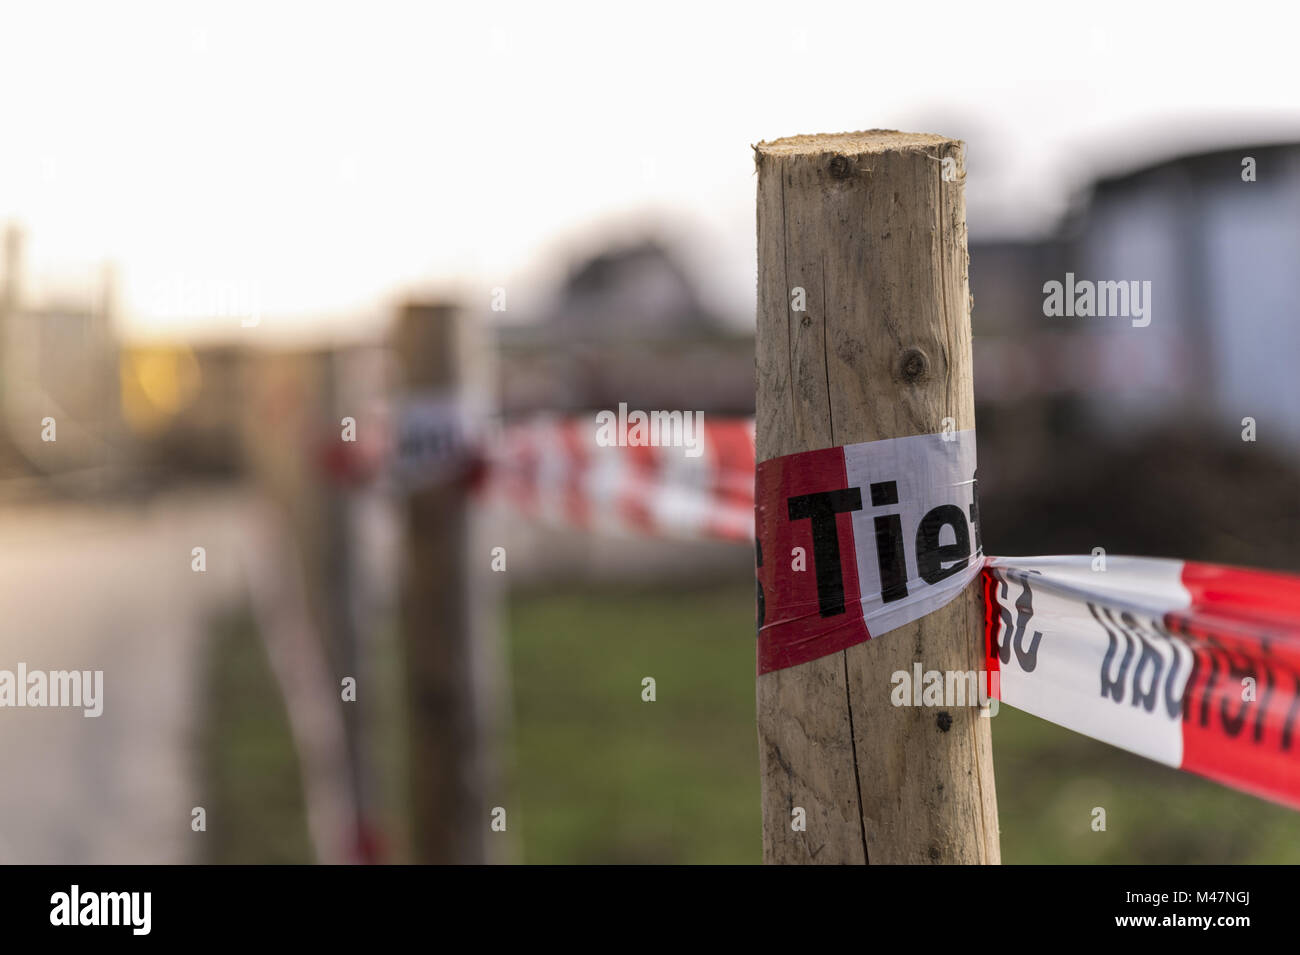 Wooden posts and caution tape at a construction site Stock Photo